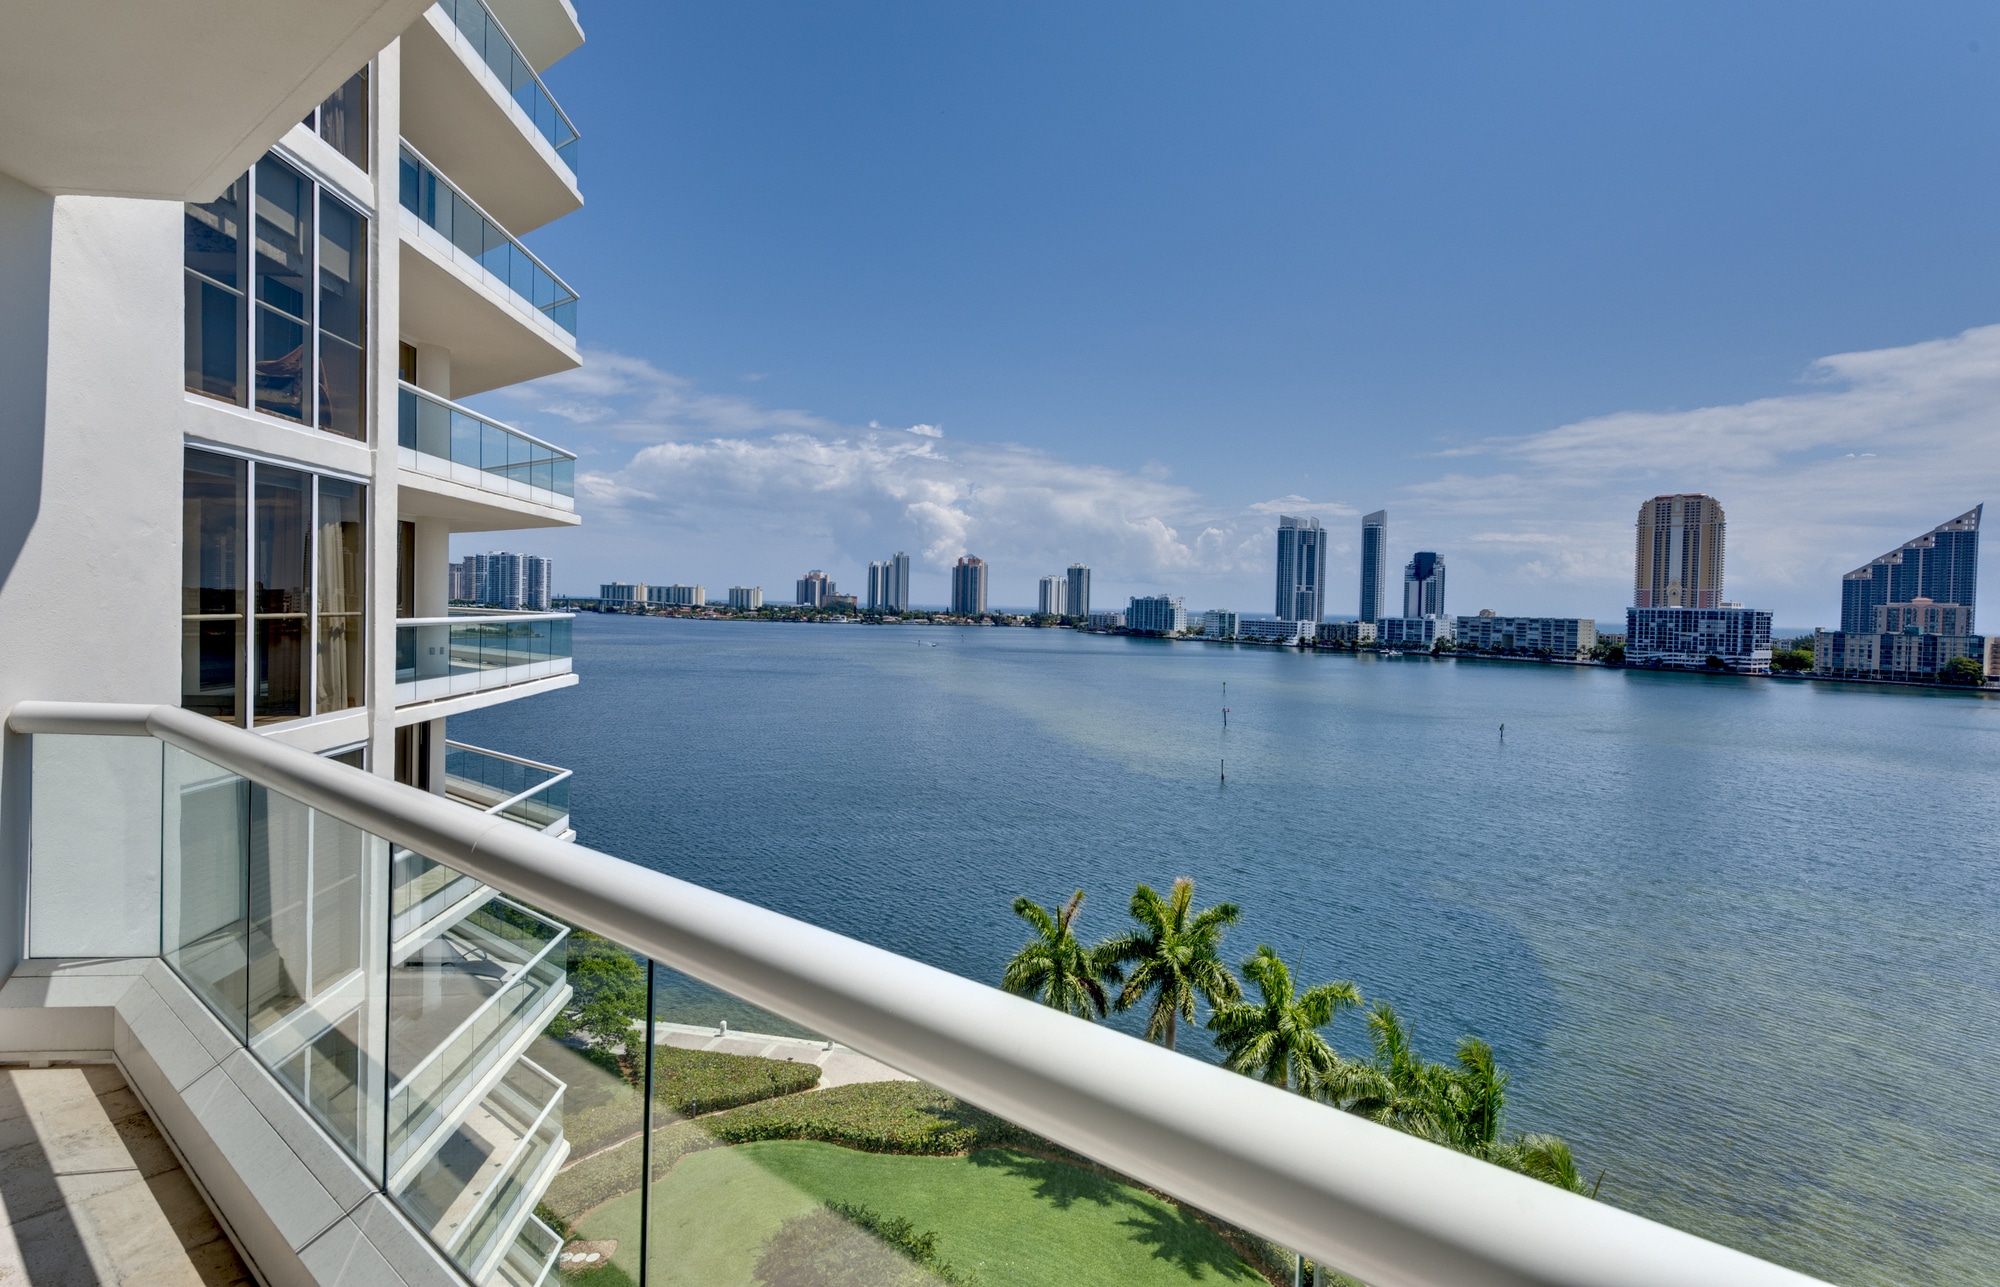 Beachside condos need a little extra attention. A condo inspection will ensure its integrity and safety.